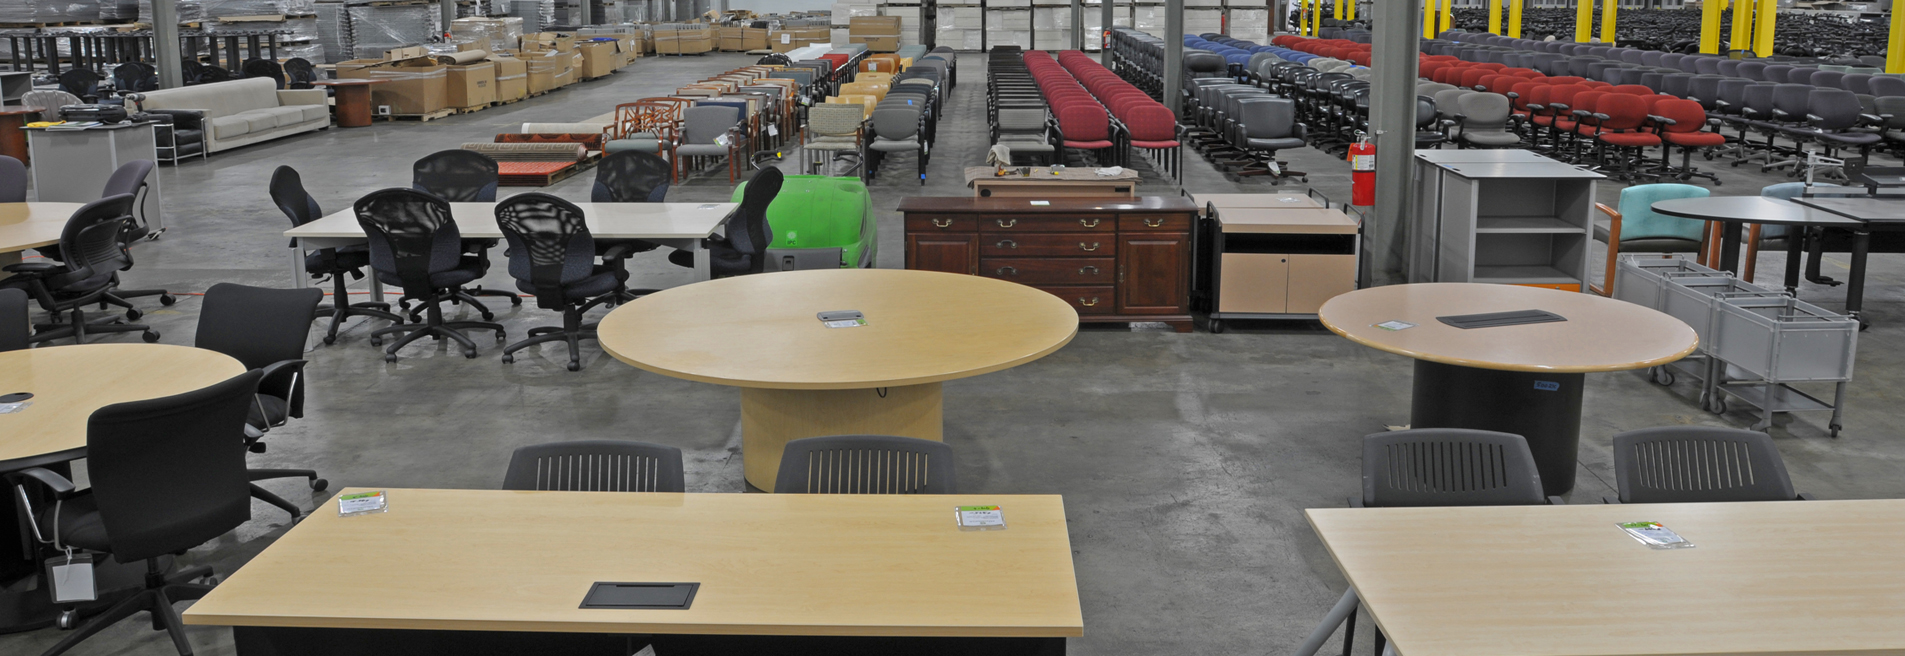 Office Furniture Sale - Office Furniture For Sale / From office